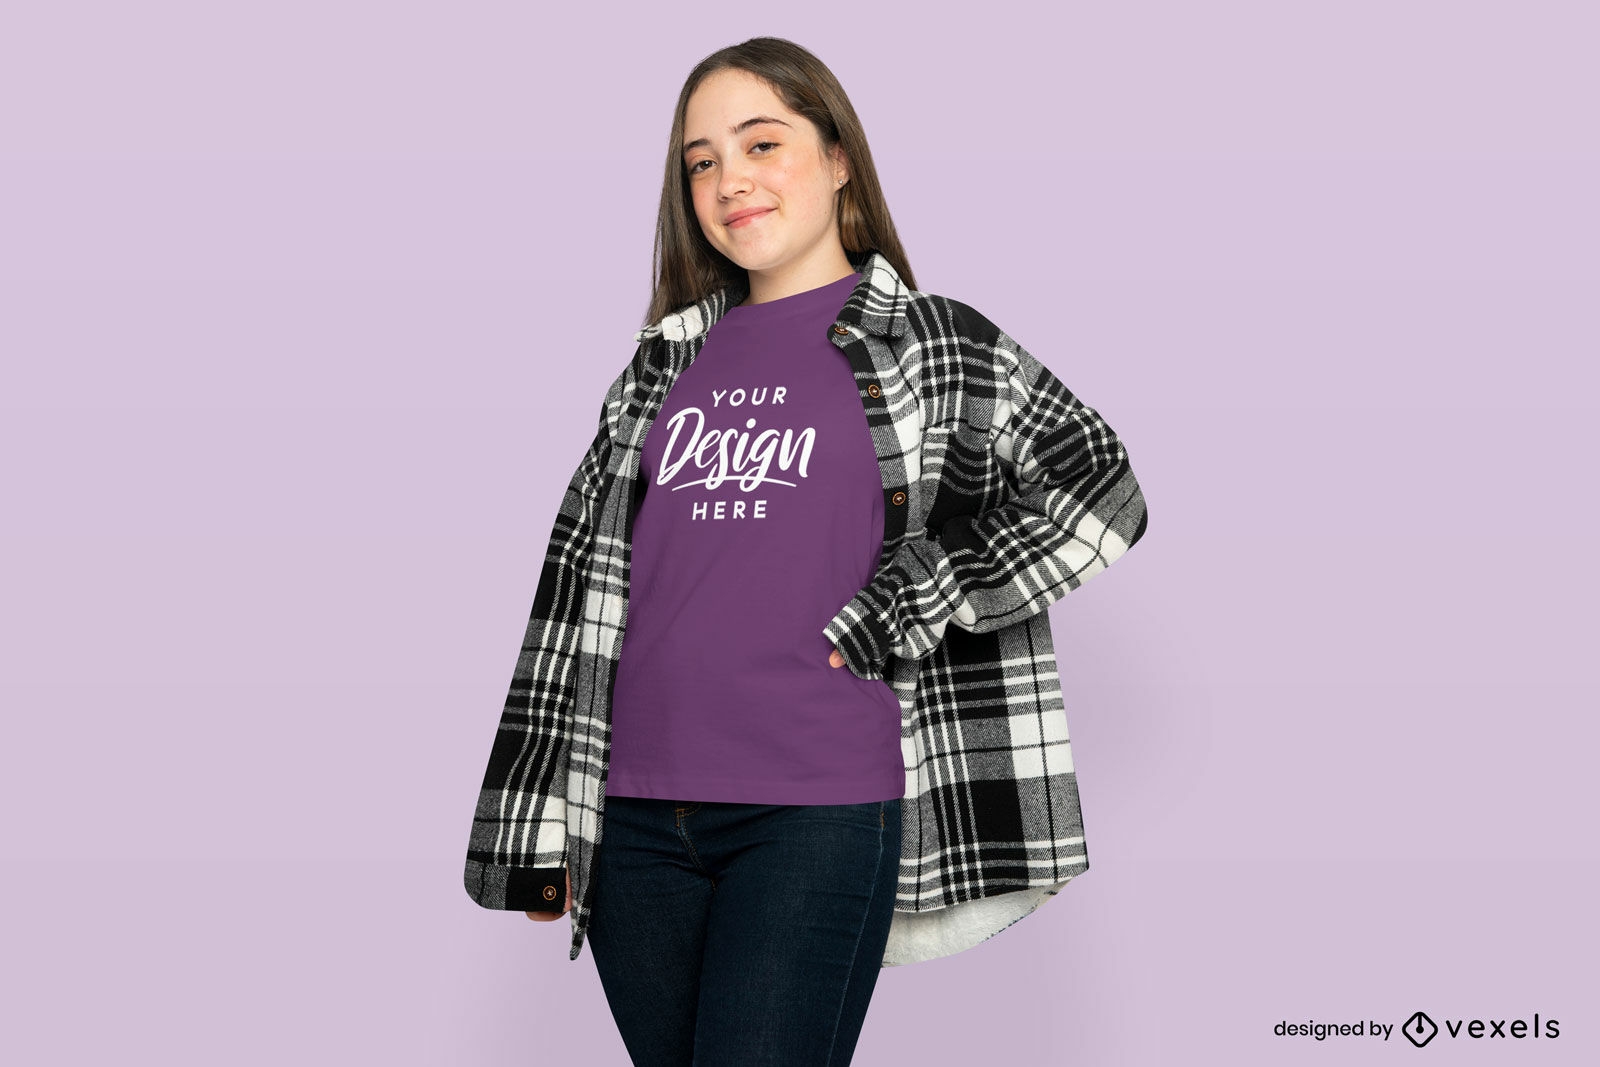 Teen girl in flannel shirt and t-shirt mockup